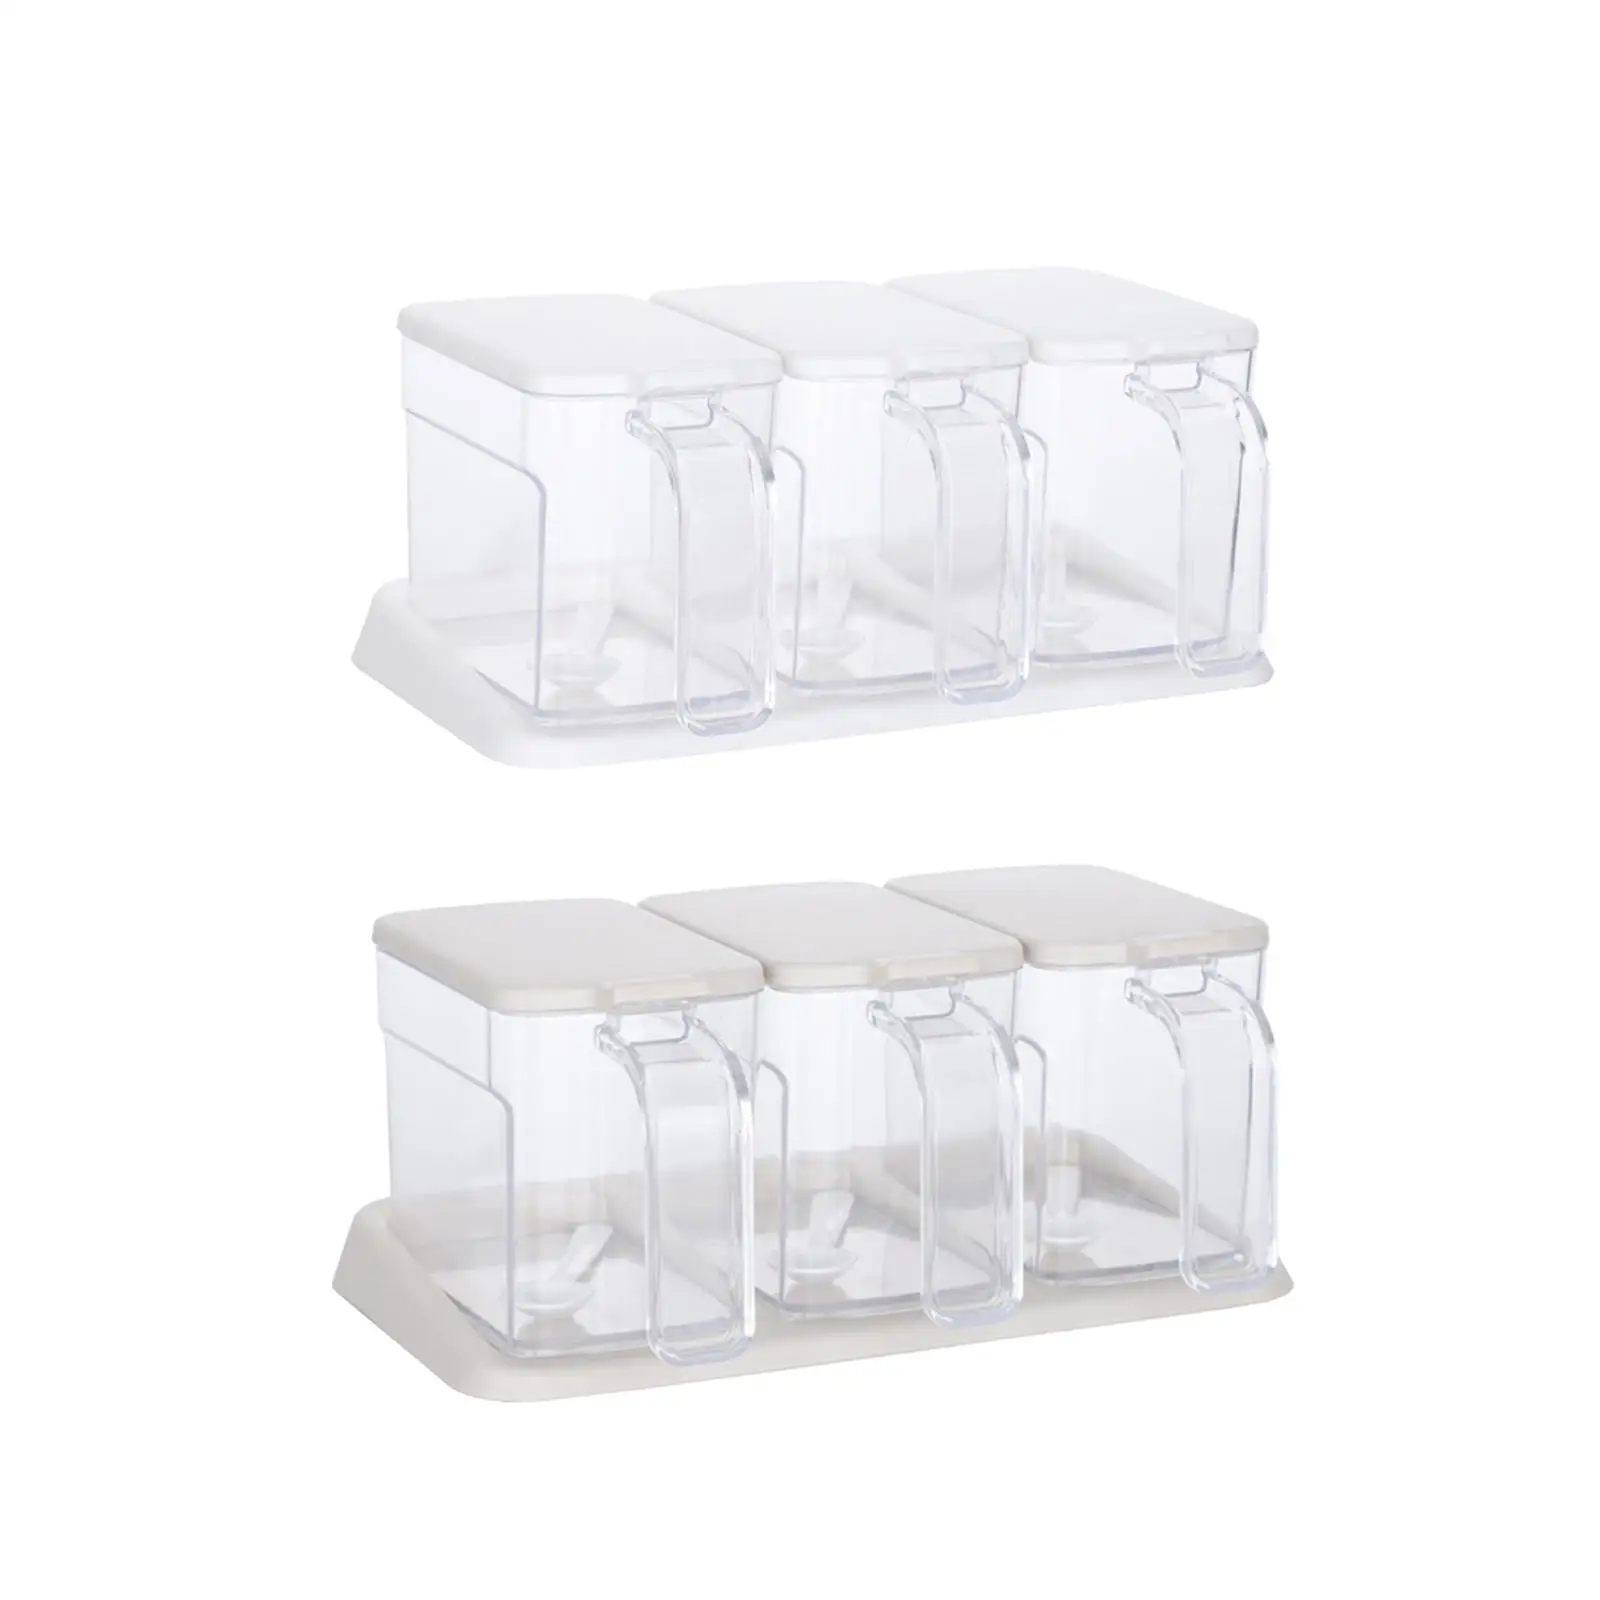 Clear Seasoning Box Removable with Base Seasoning Rack Canister Kitchen Spice Pots Condiments Container for Sugar Salt Spice